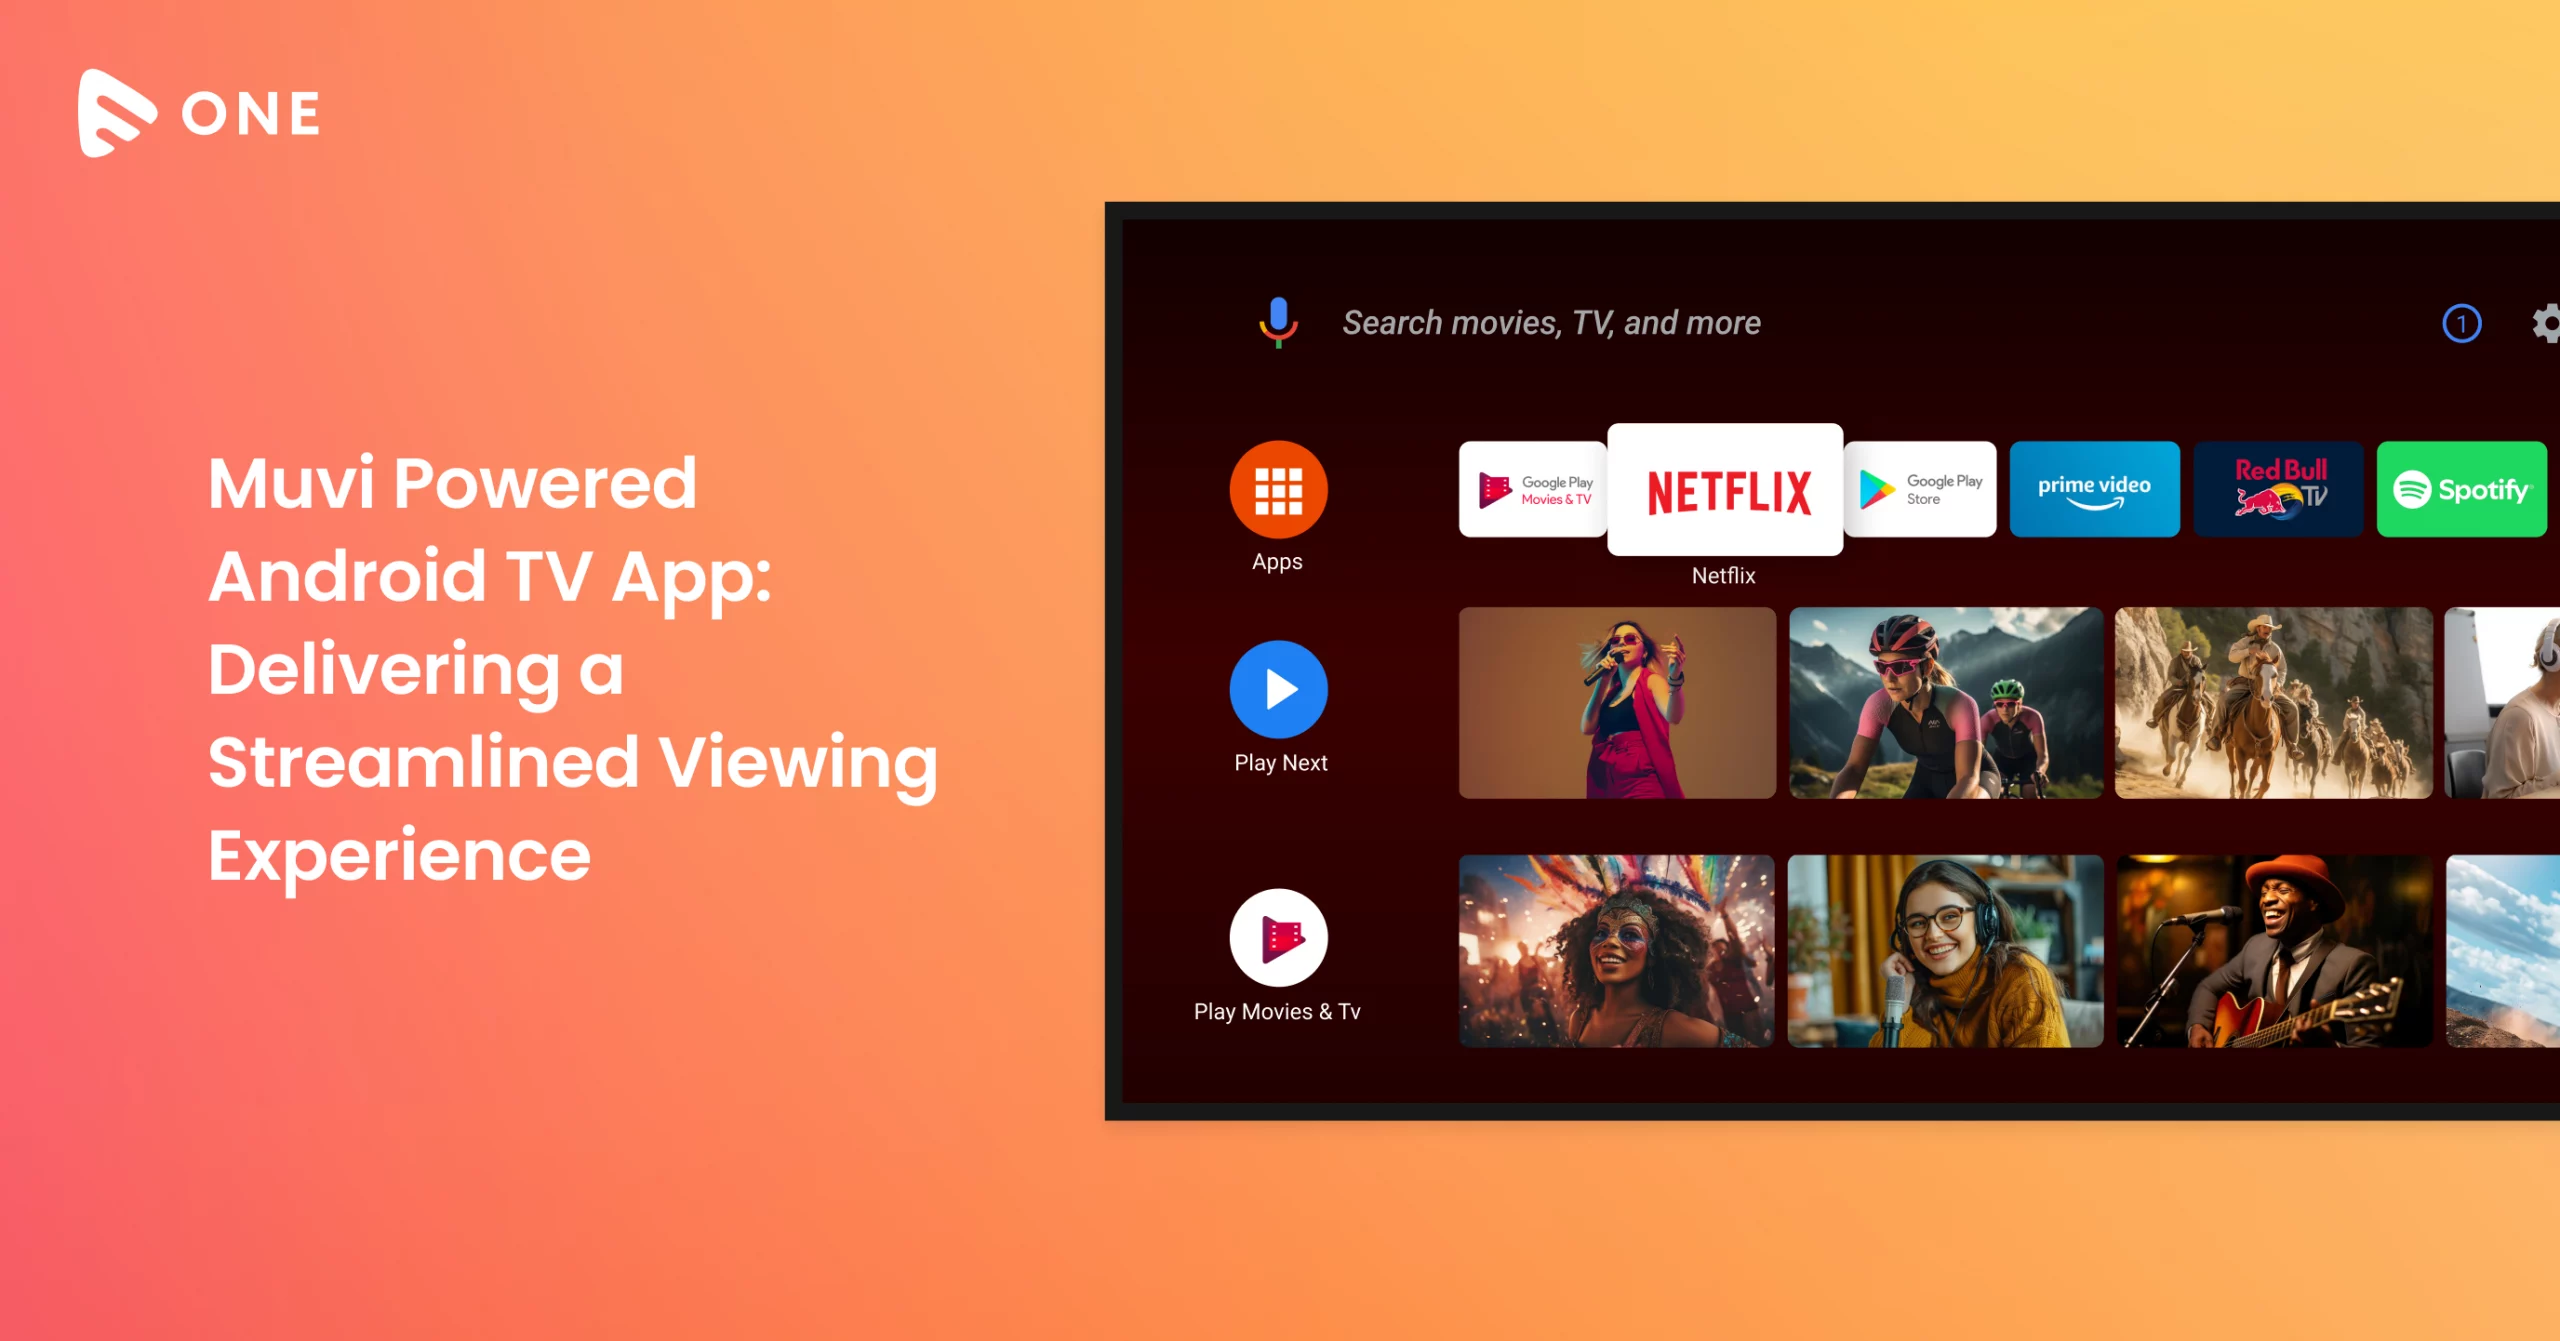 Muvi Powered Android TV App: Delivering a Streamlined Viewing Experience